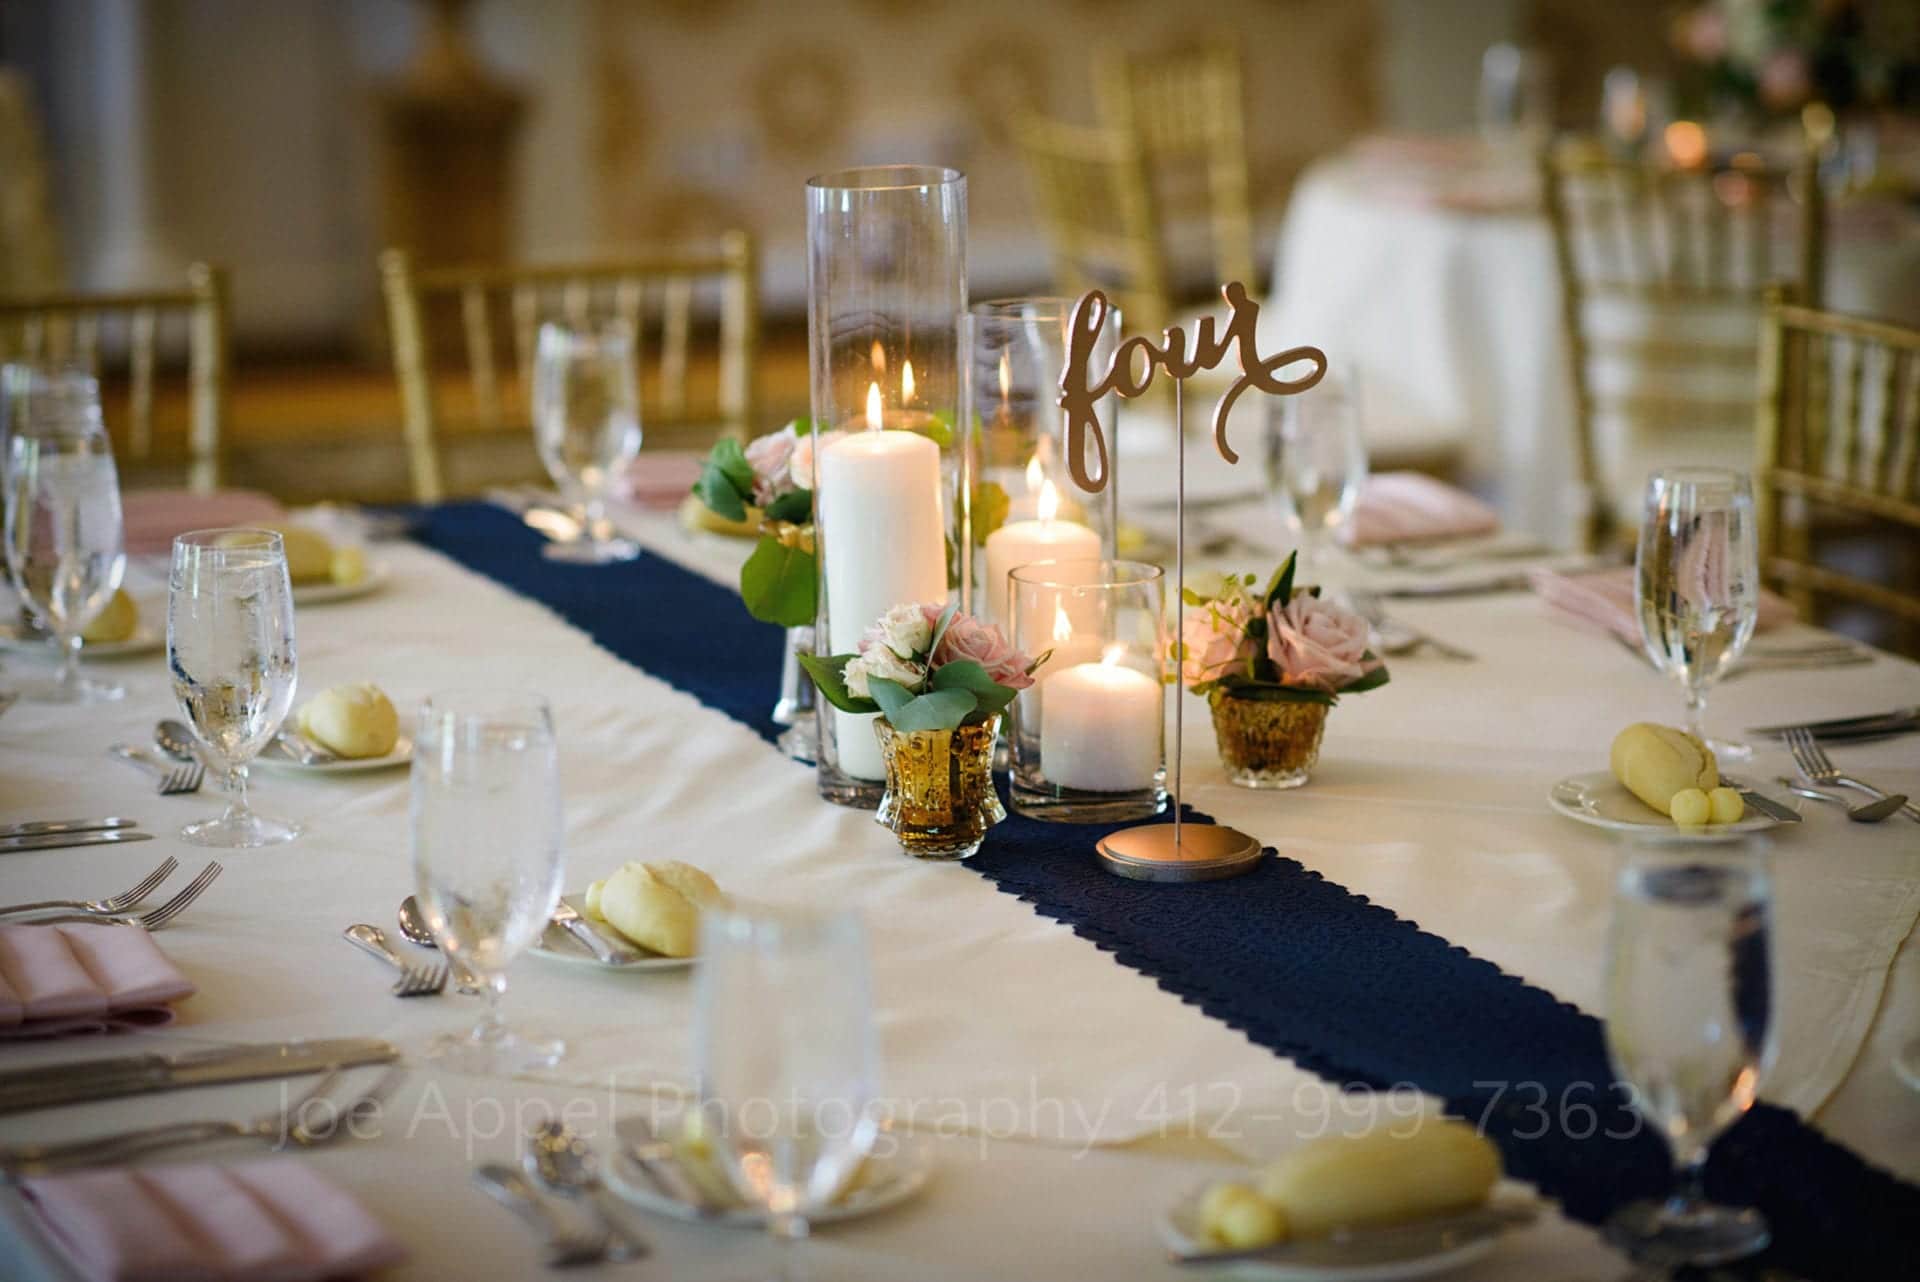 Detail of table four with a centerpiece of candles and small vases of roses. Plates with pink folded napkins and gold chairs. A navy blue runner in the middle during their Omni Bedford Springs Resort Wedding.